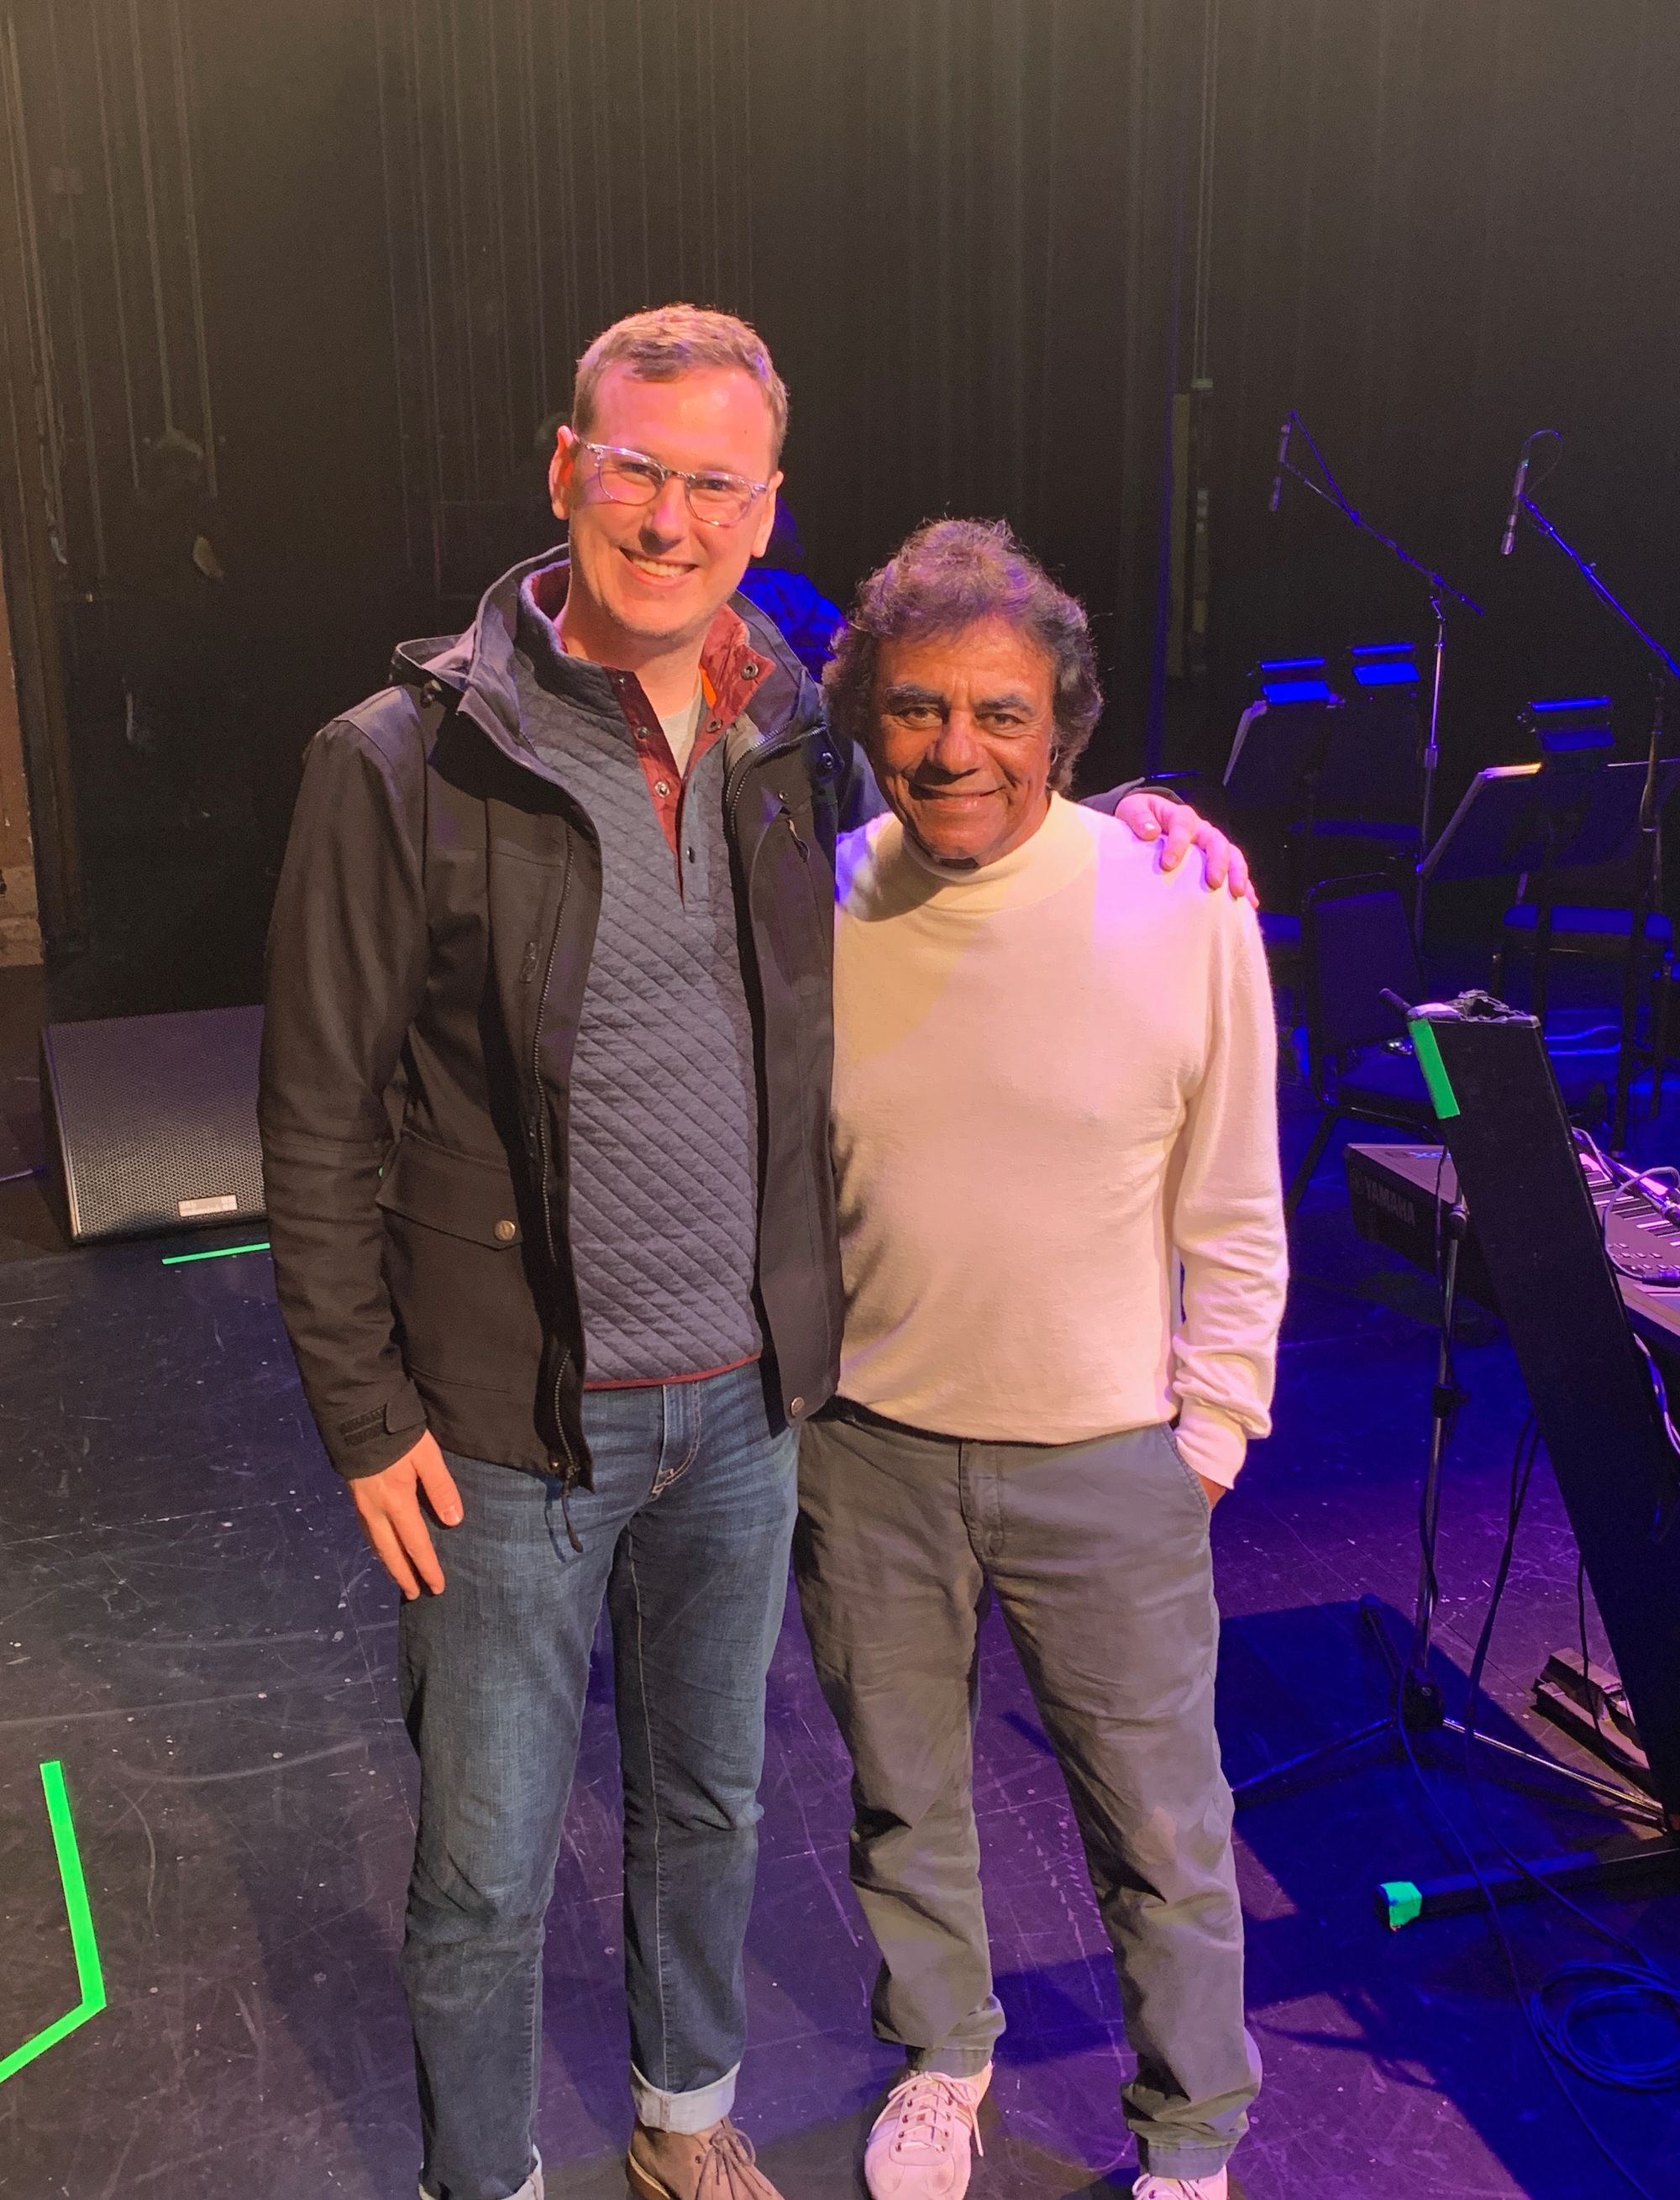 Sometimes I get to back up Johnny Mathis on stage